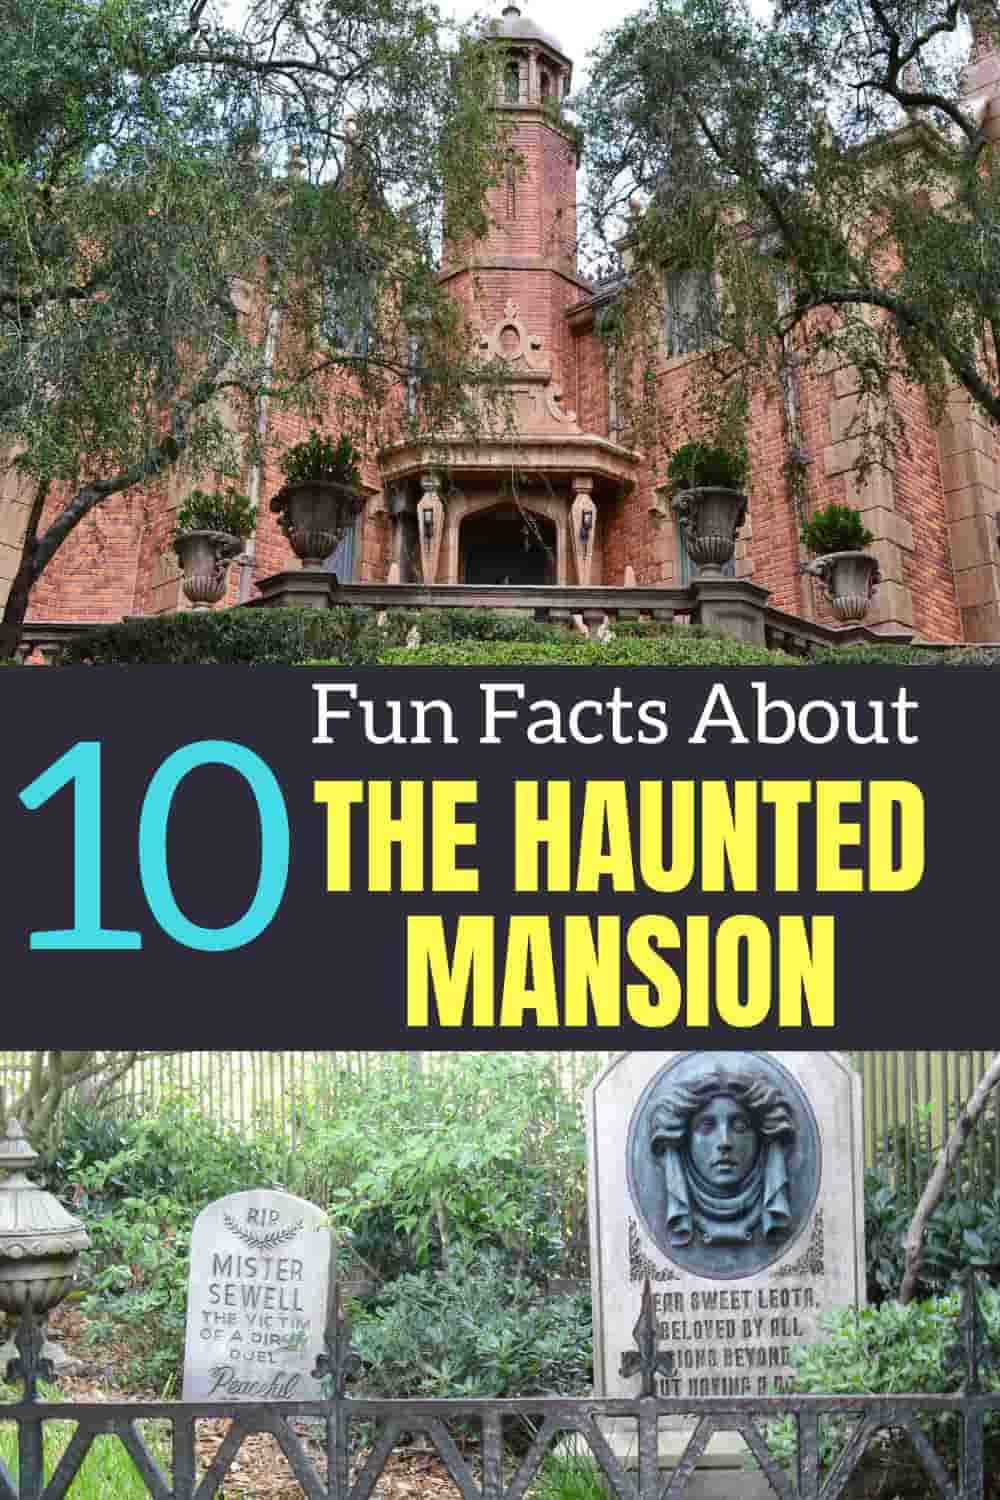 10 Haunted Mansion Ride Facts You Might Not Know